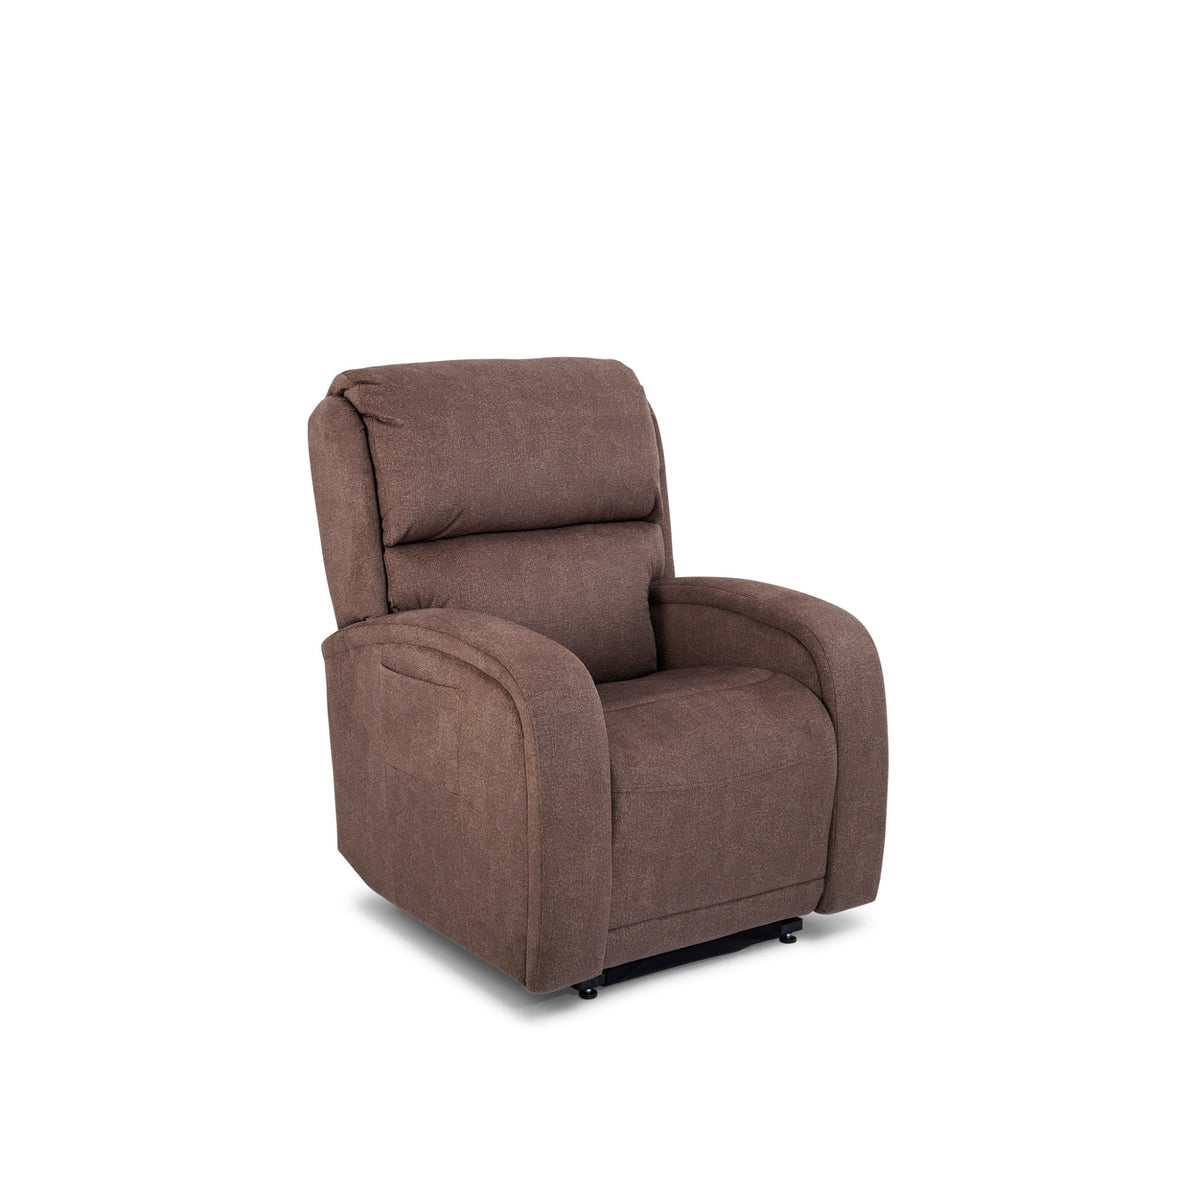 UltraComfort Apollo Power Lift Chair Recliner